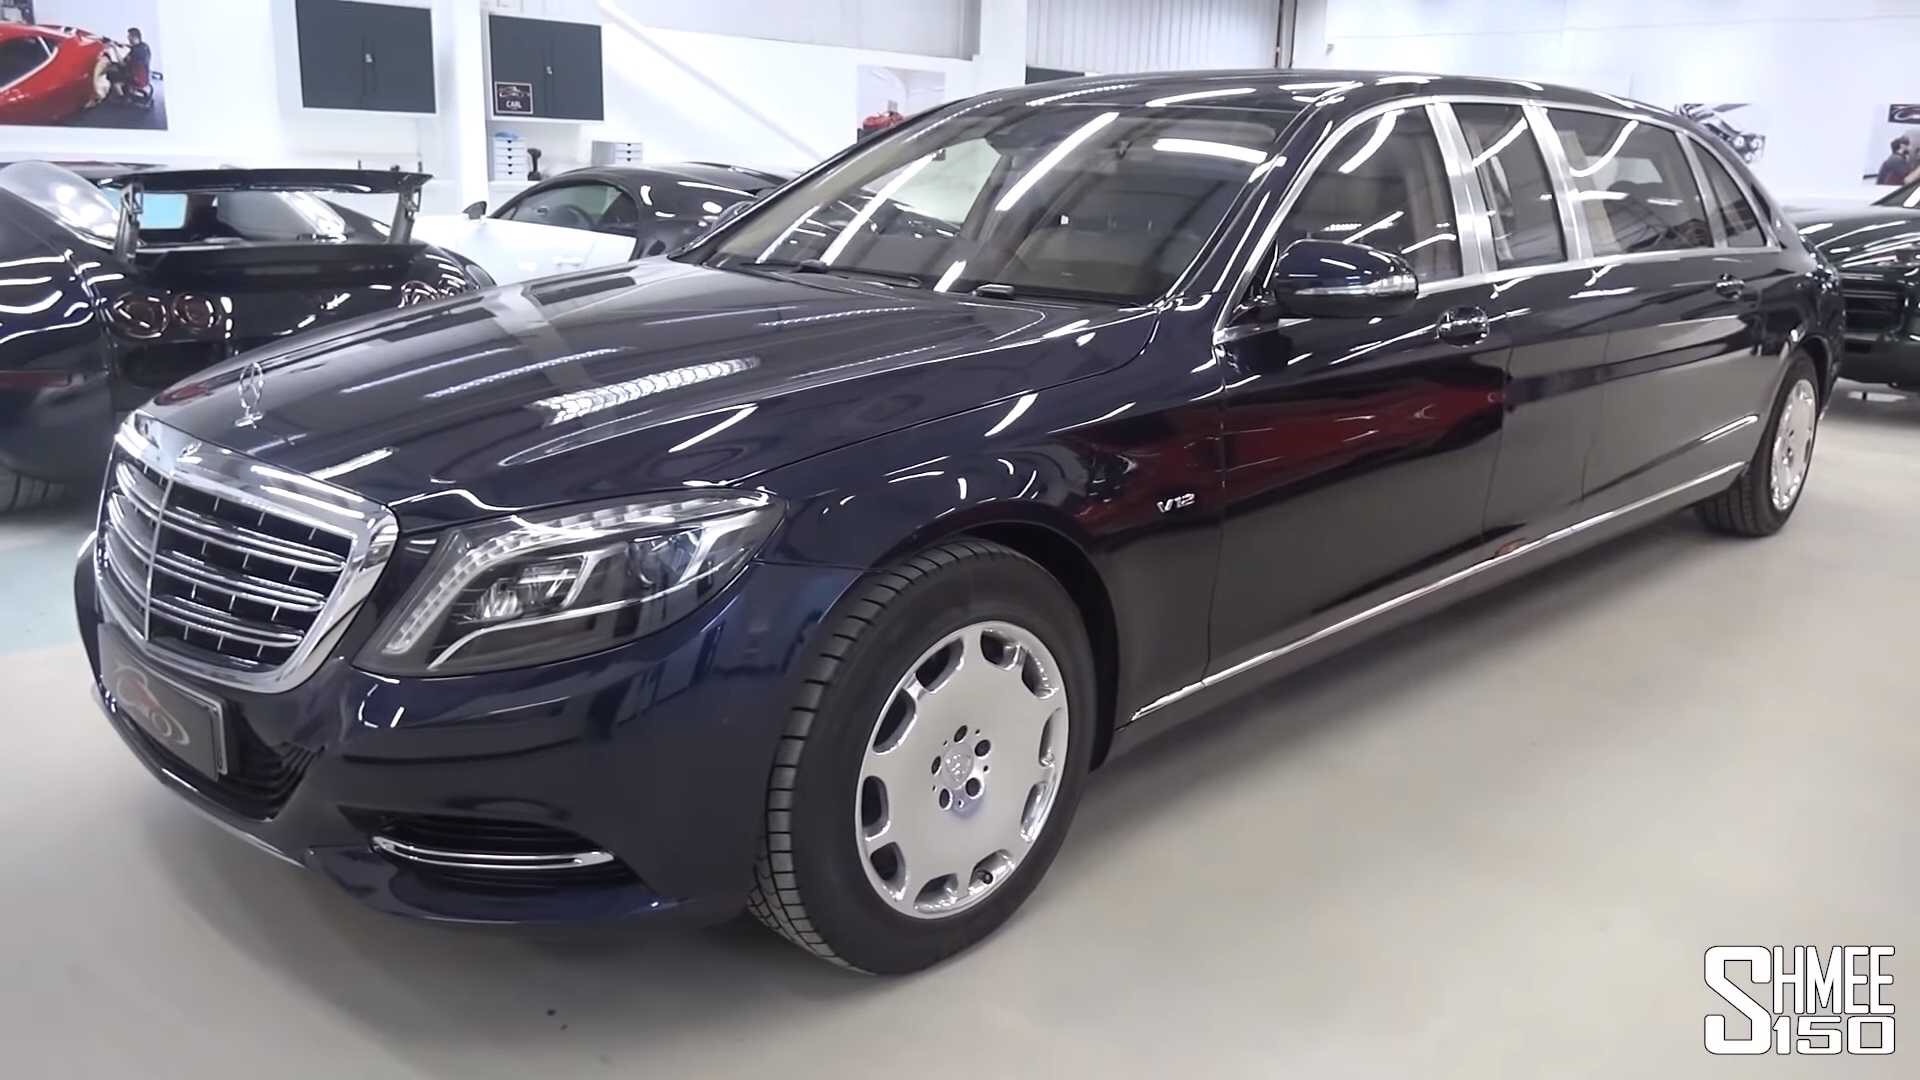 Have A Look Inside The Gigantic Mercedes-Maybach S600 Pullman